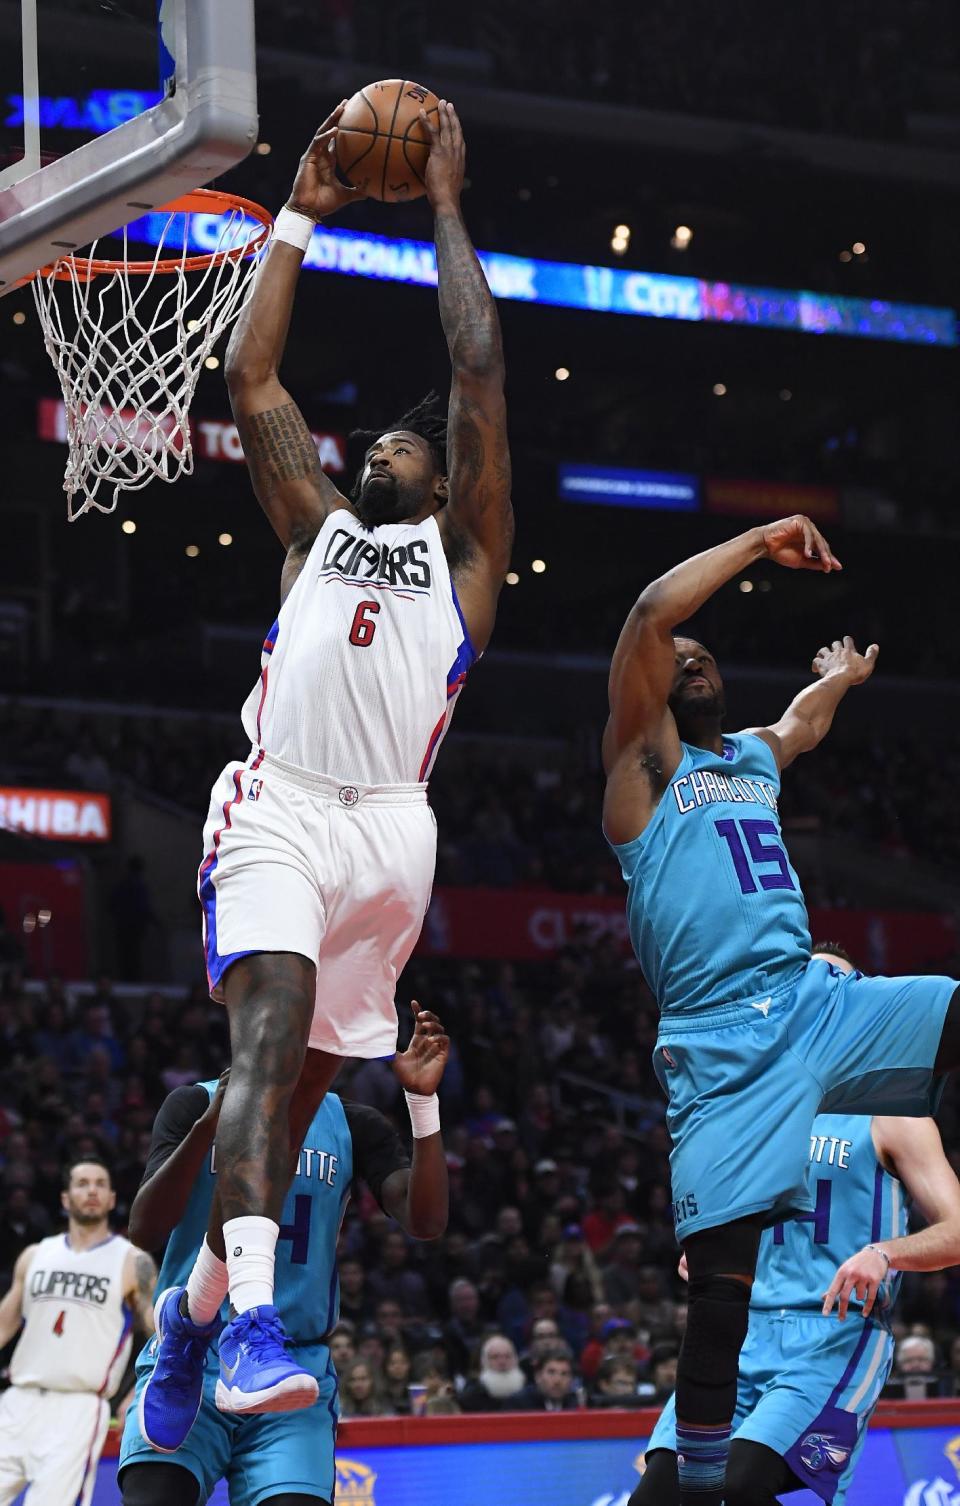 Los Angeles Clippers center DeAndre Jordan, left, dunks as Charlotte Hornets guard Kemba Walker defends during the first half of an NBA basketball game, Sunday, Feb. 26, 2017, in Los Angeles. (AP Photo/Mark J. Terrill)